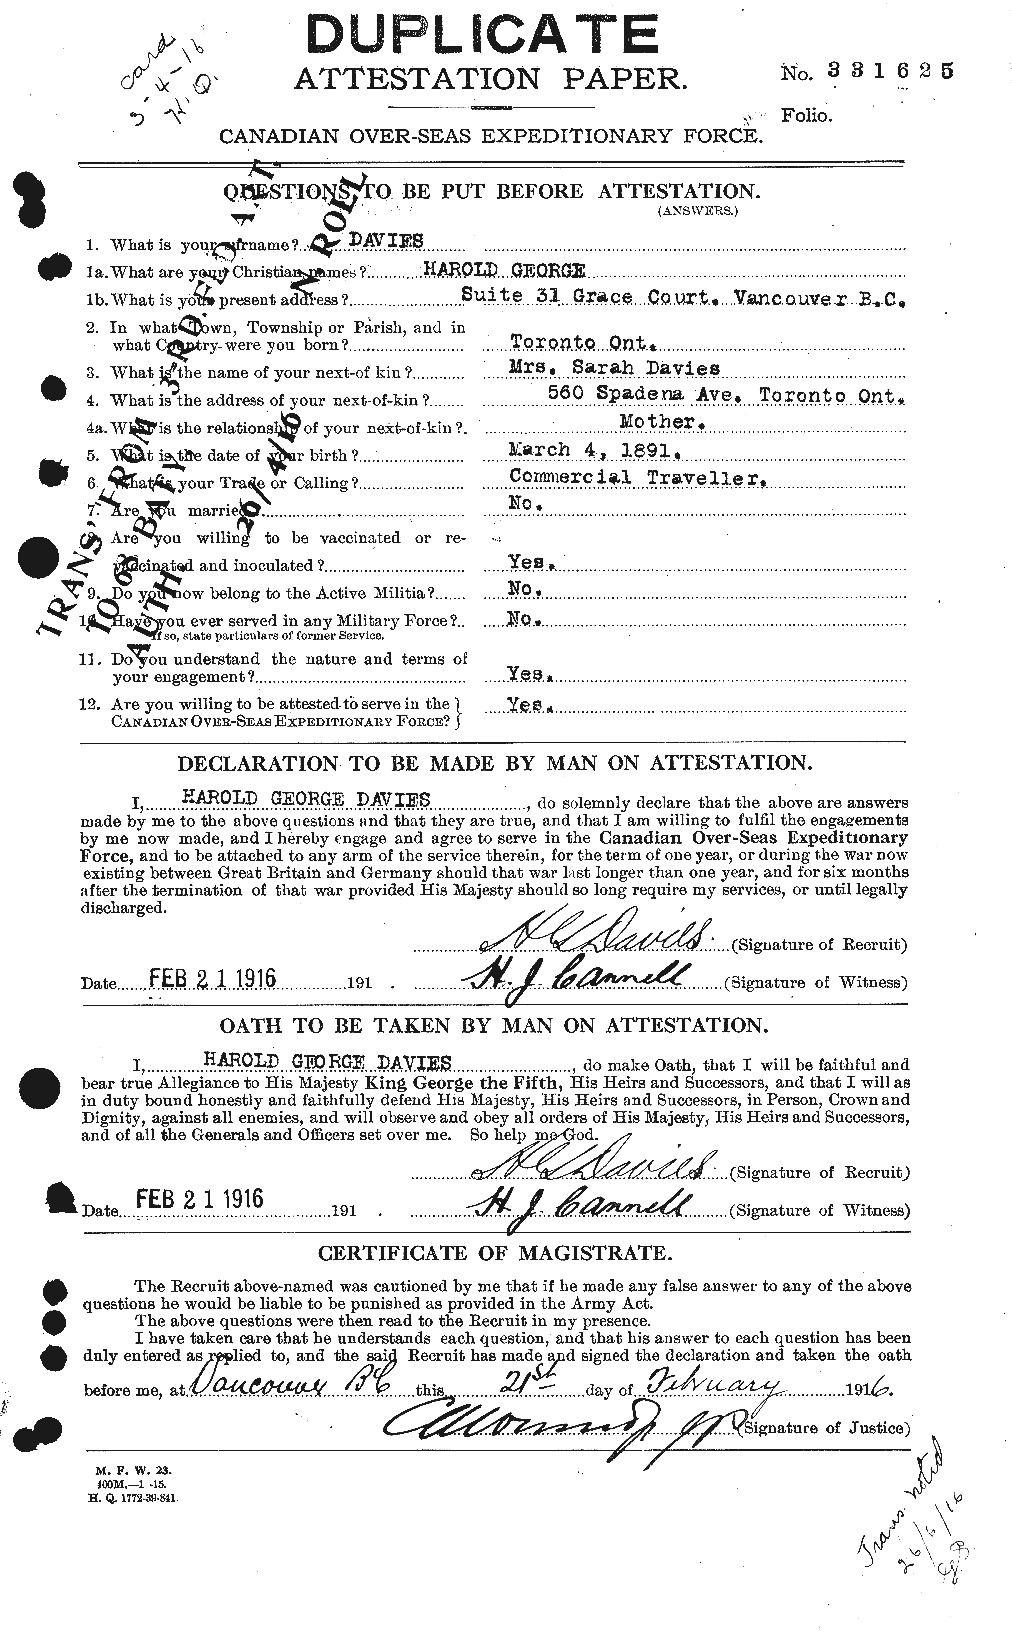 Personnel Records of the First World War - CEF 283208a